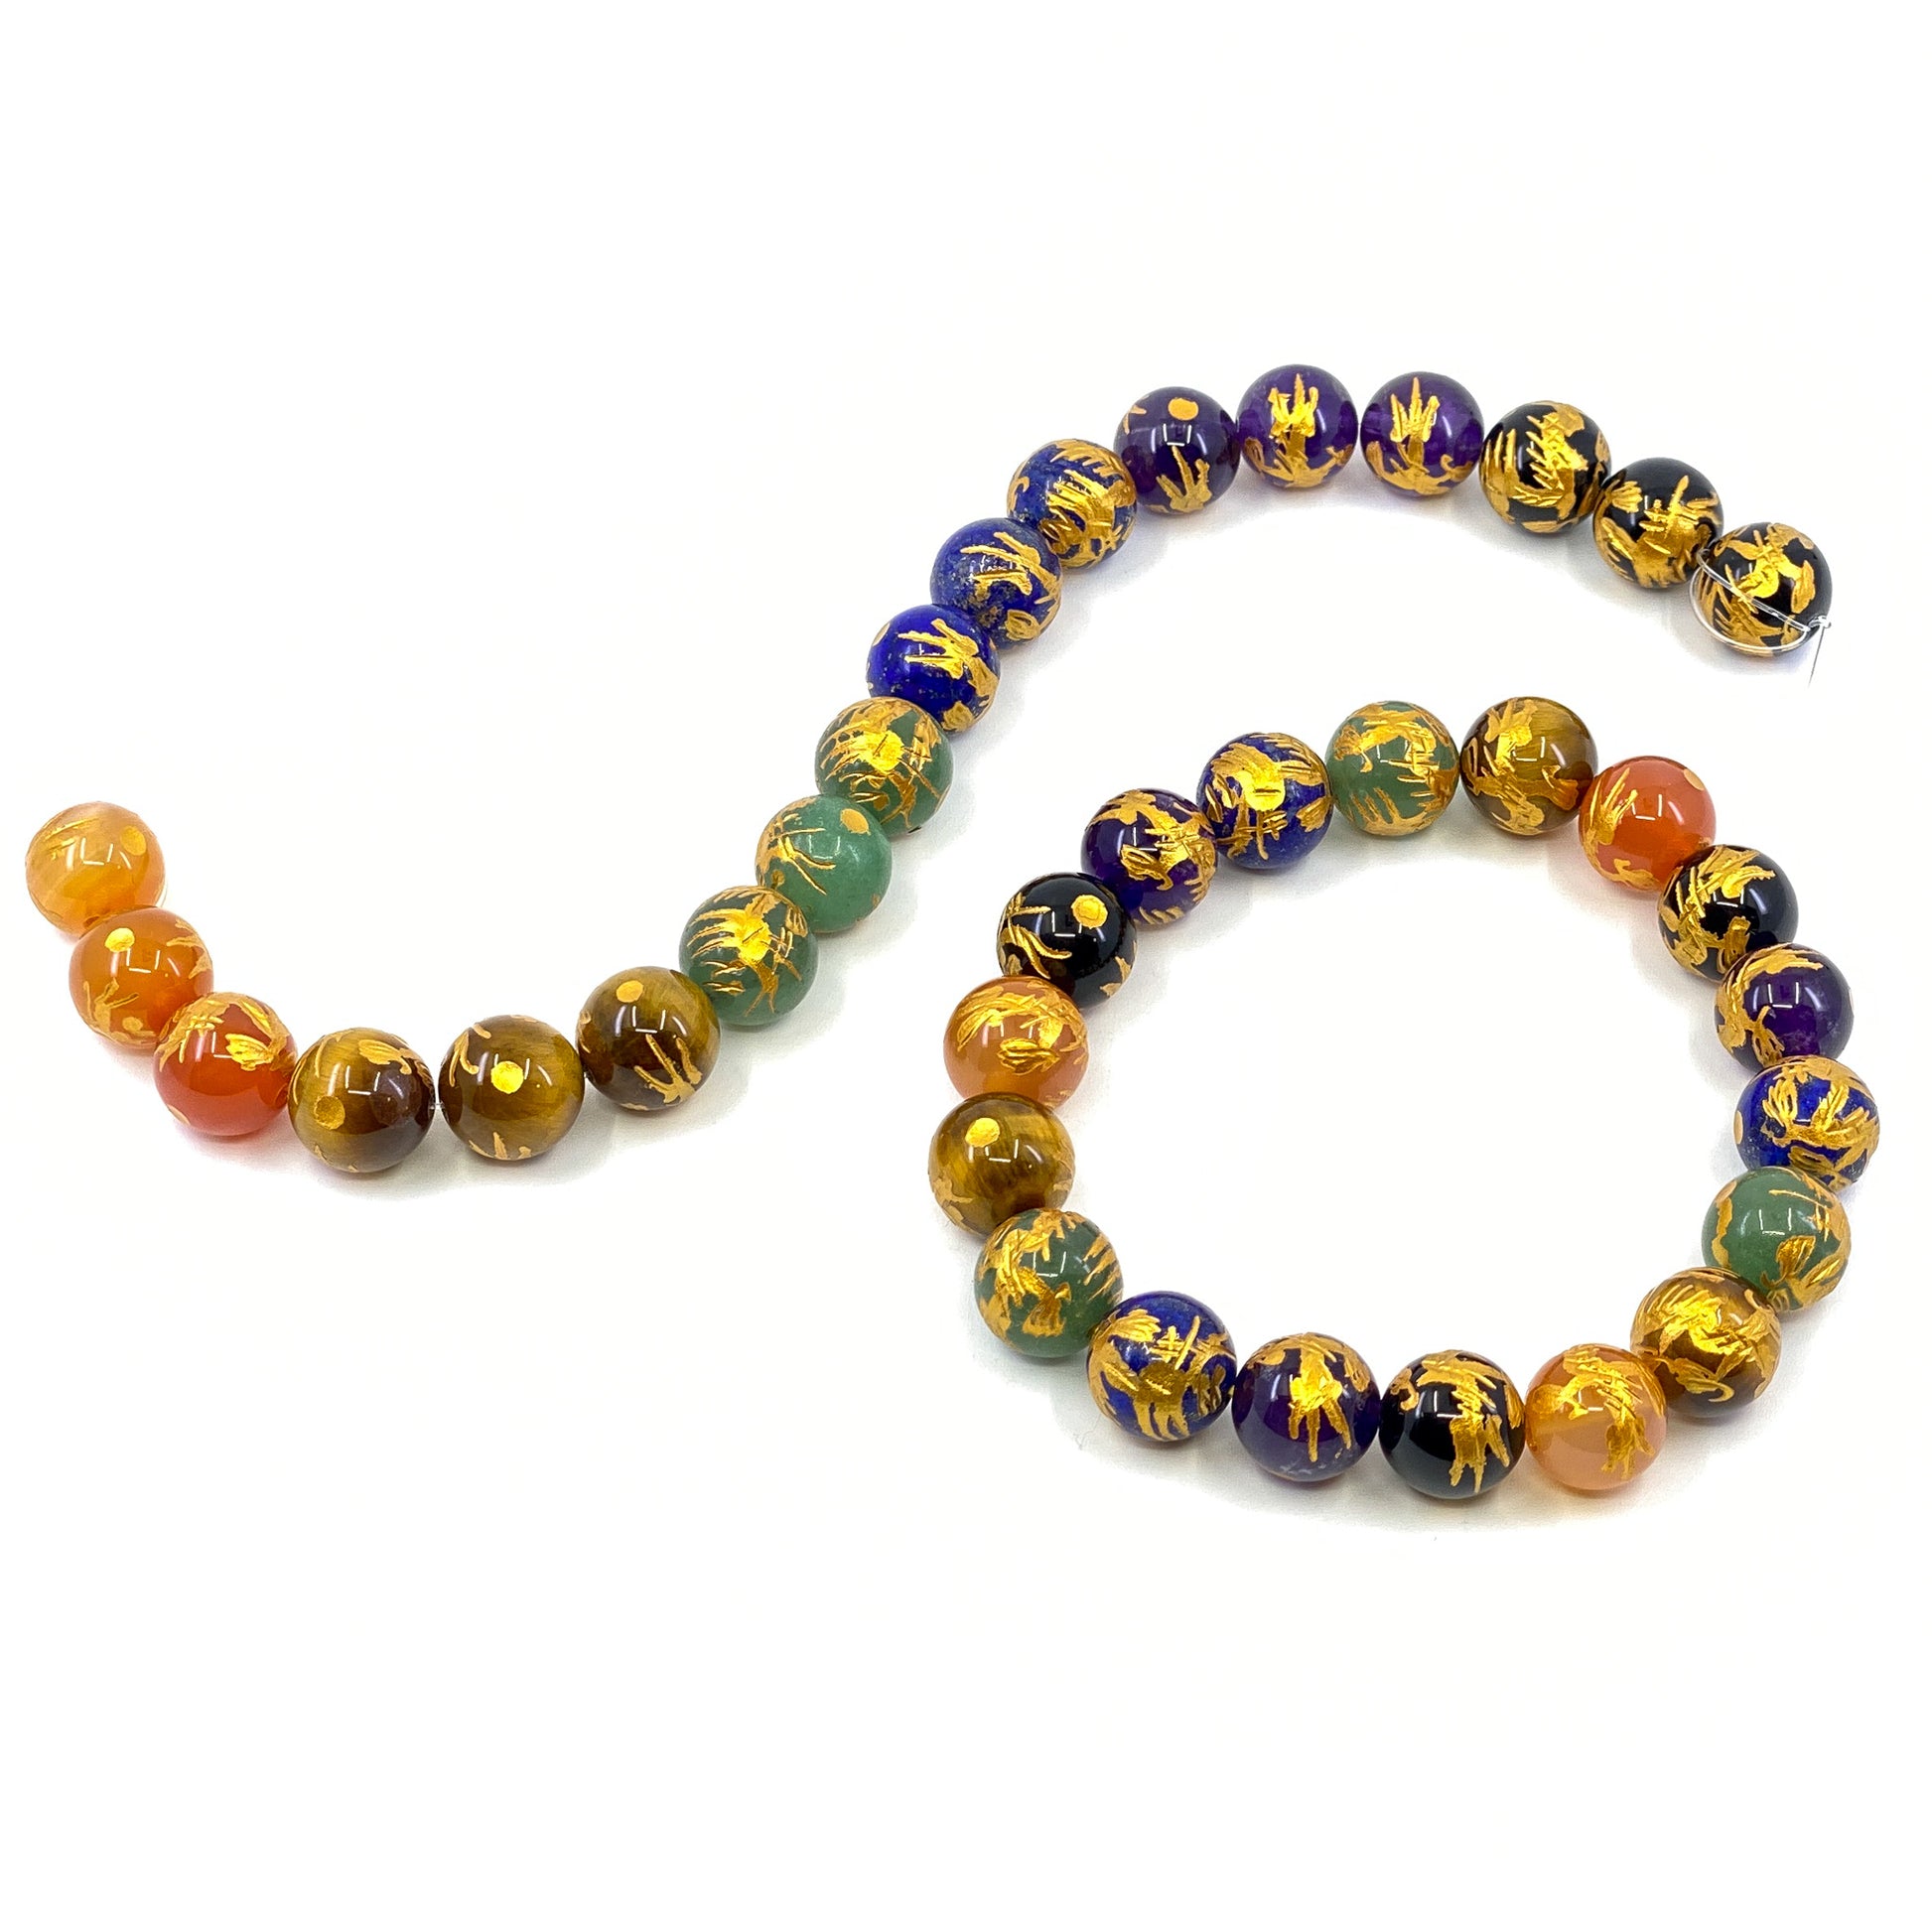 Gemstone with Etched Gold Dragon 12mm Round Bead (7 Options Available)